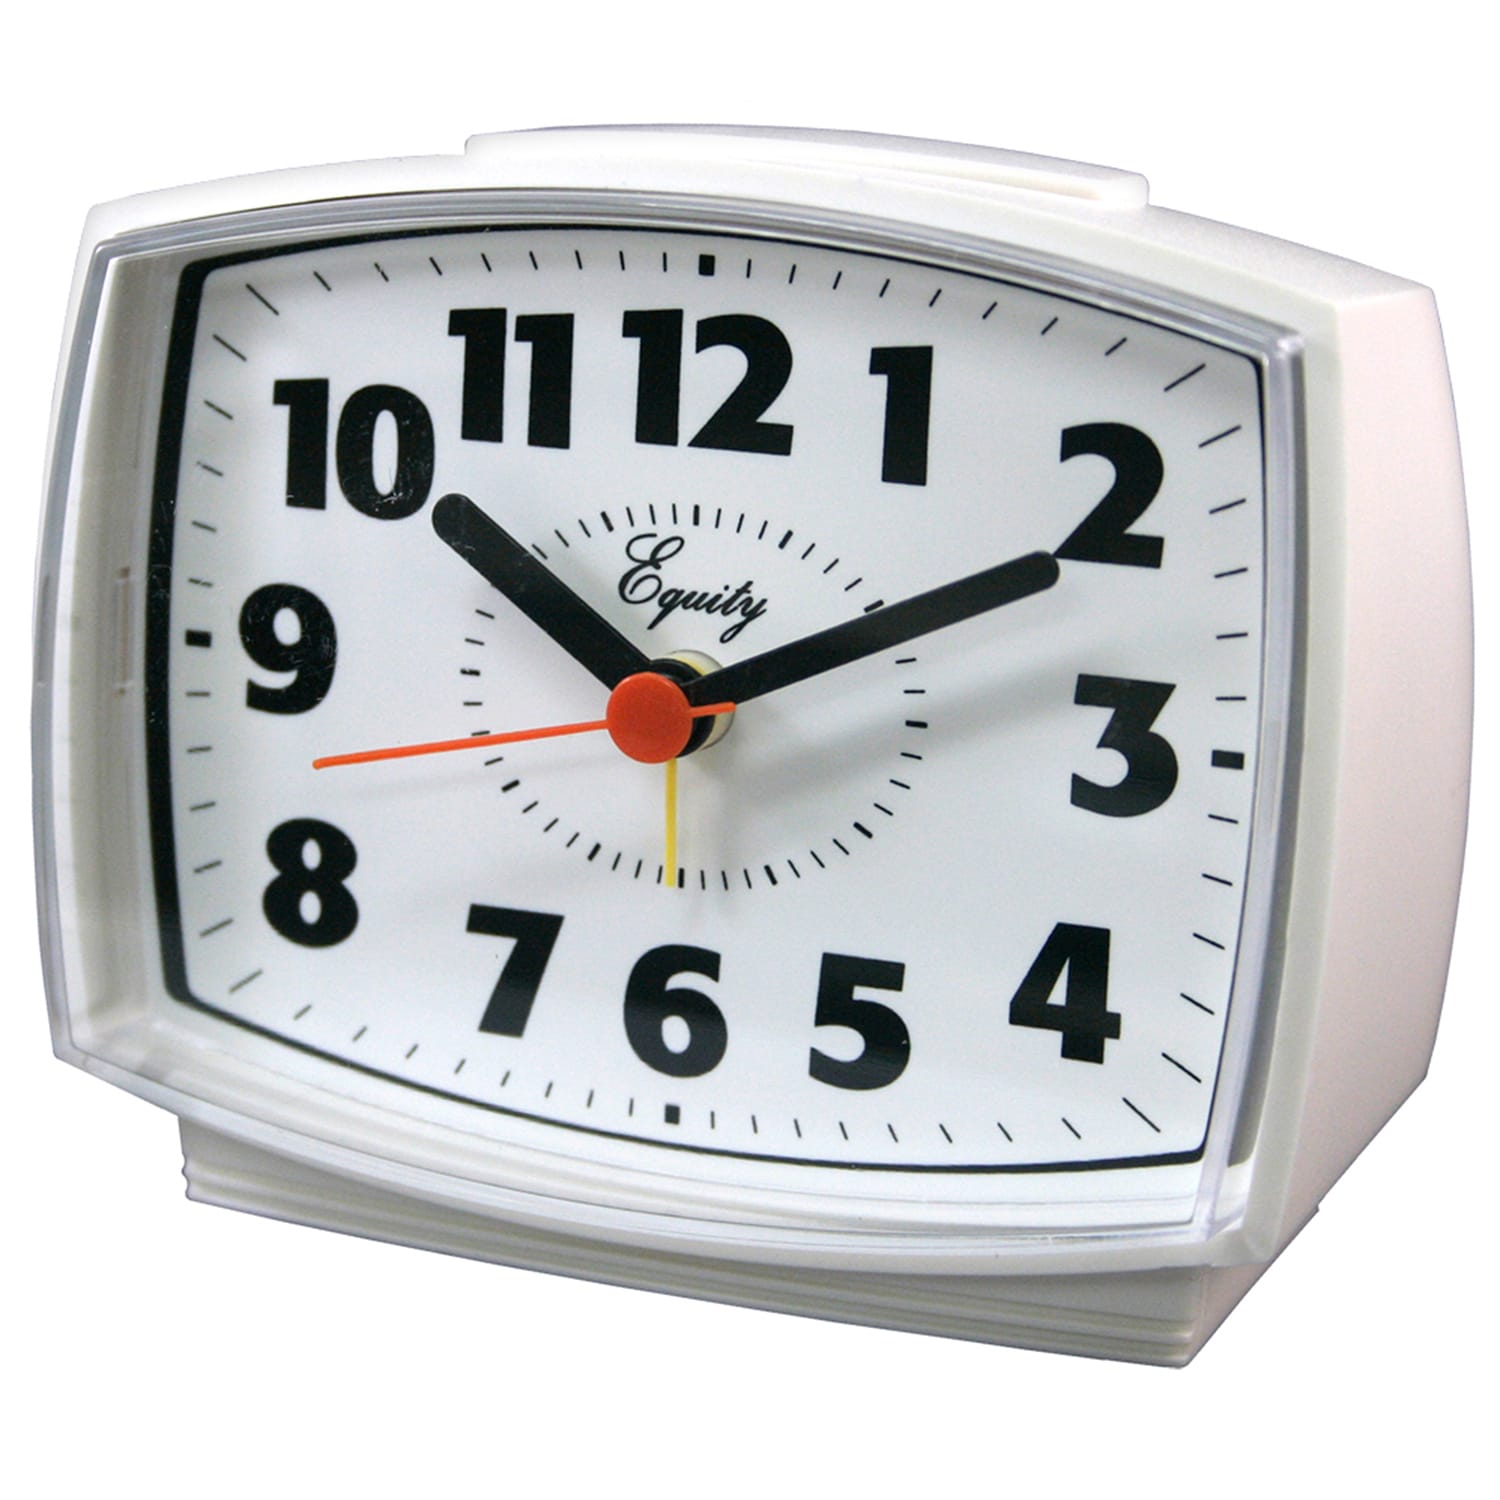 Equity by La Crosse 33100 Electric Alarm Clock with Lighted Dial